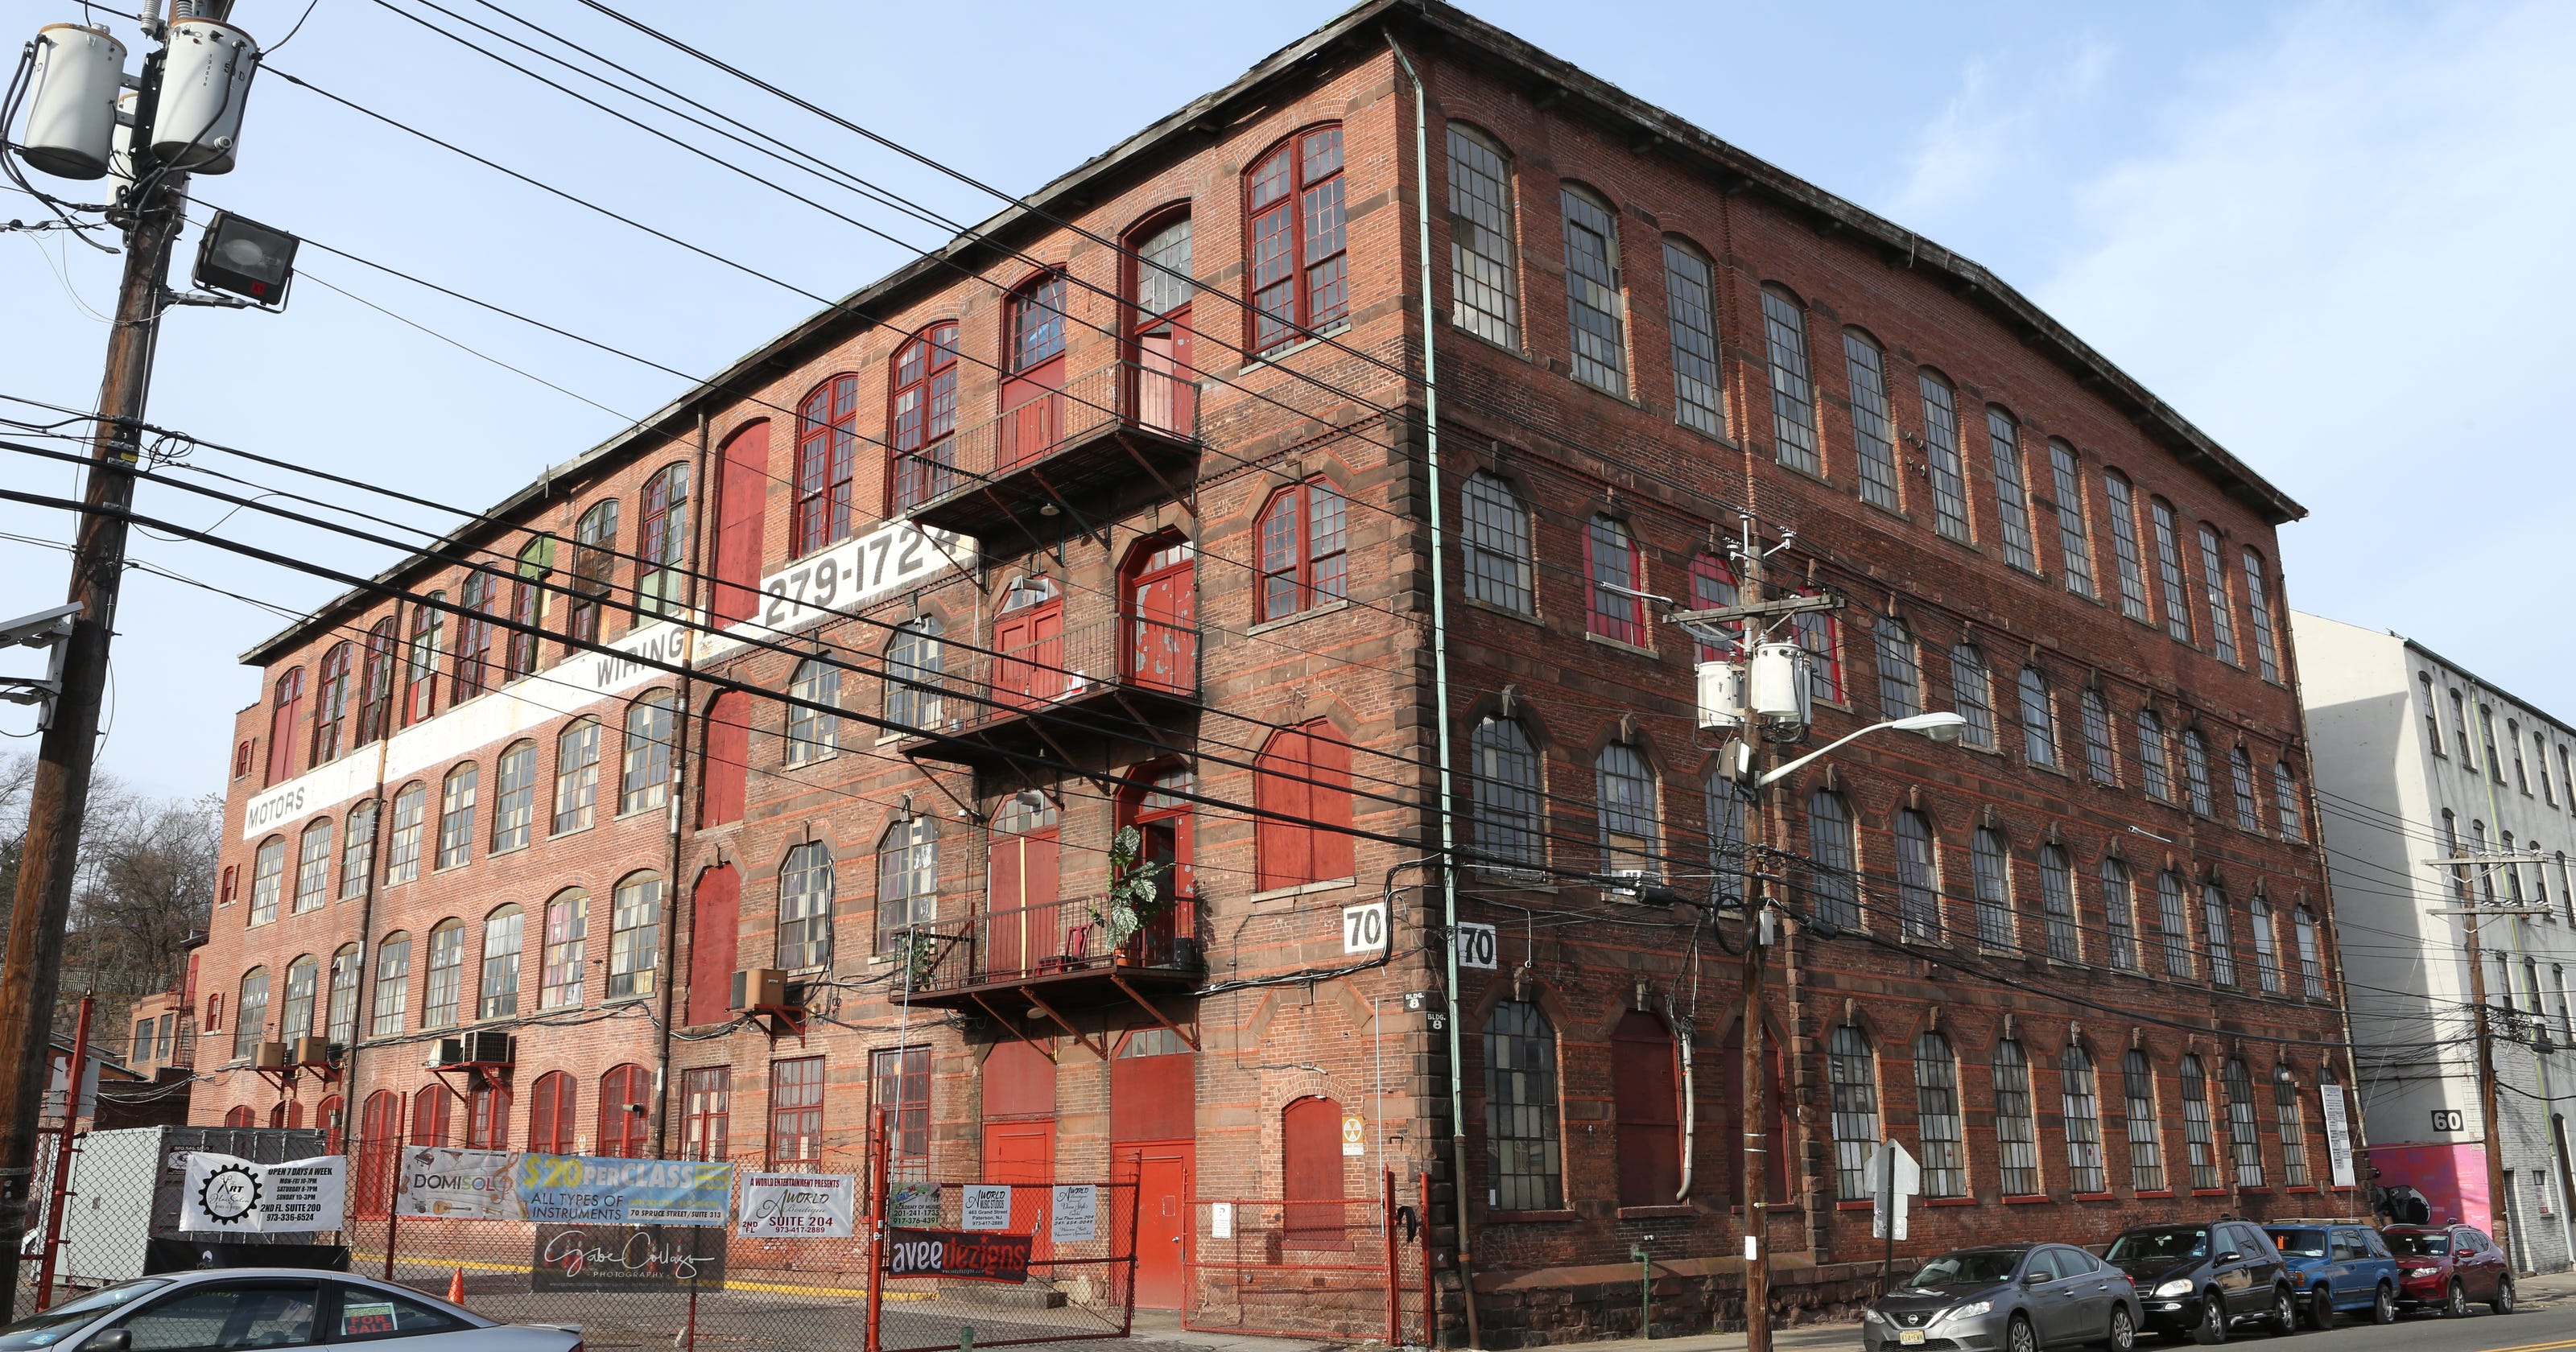 Patersons Art Factory Looking For 9m Renovation 9117